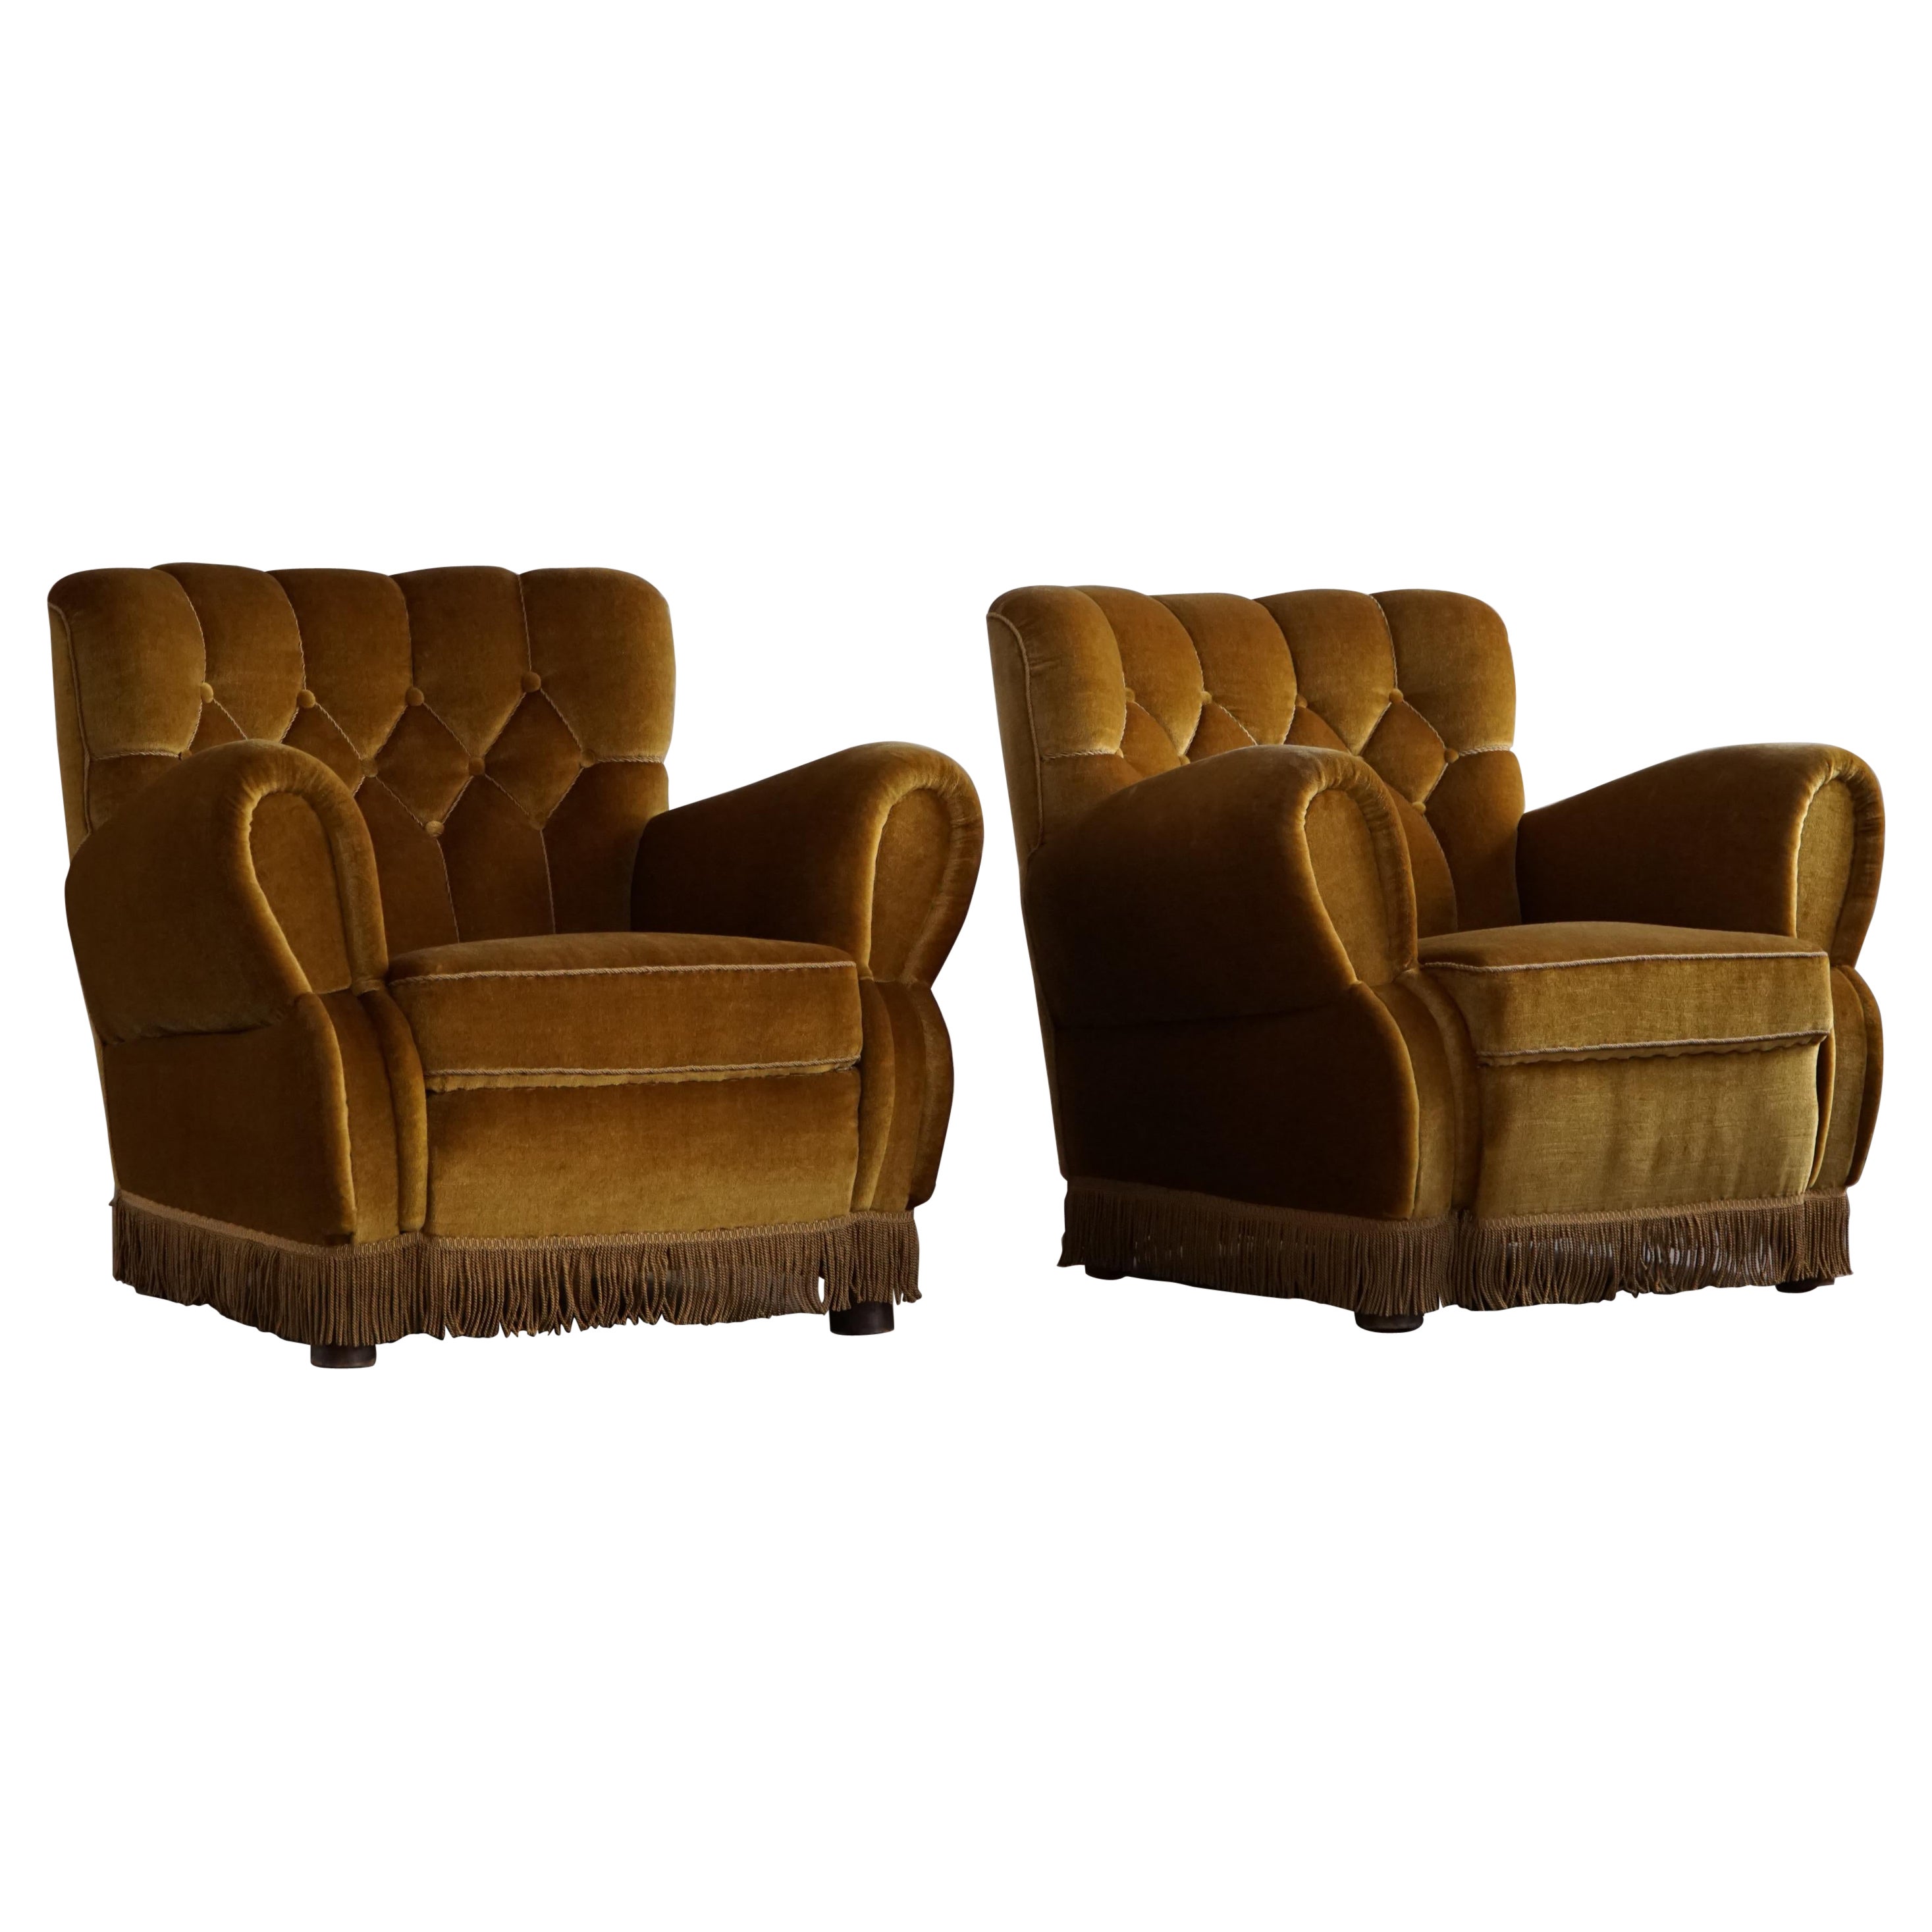 A Pair of Art Deco Lounge Chairs in Yellow Velour, Danish Carbinetmaker, 1940s